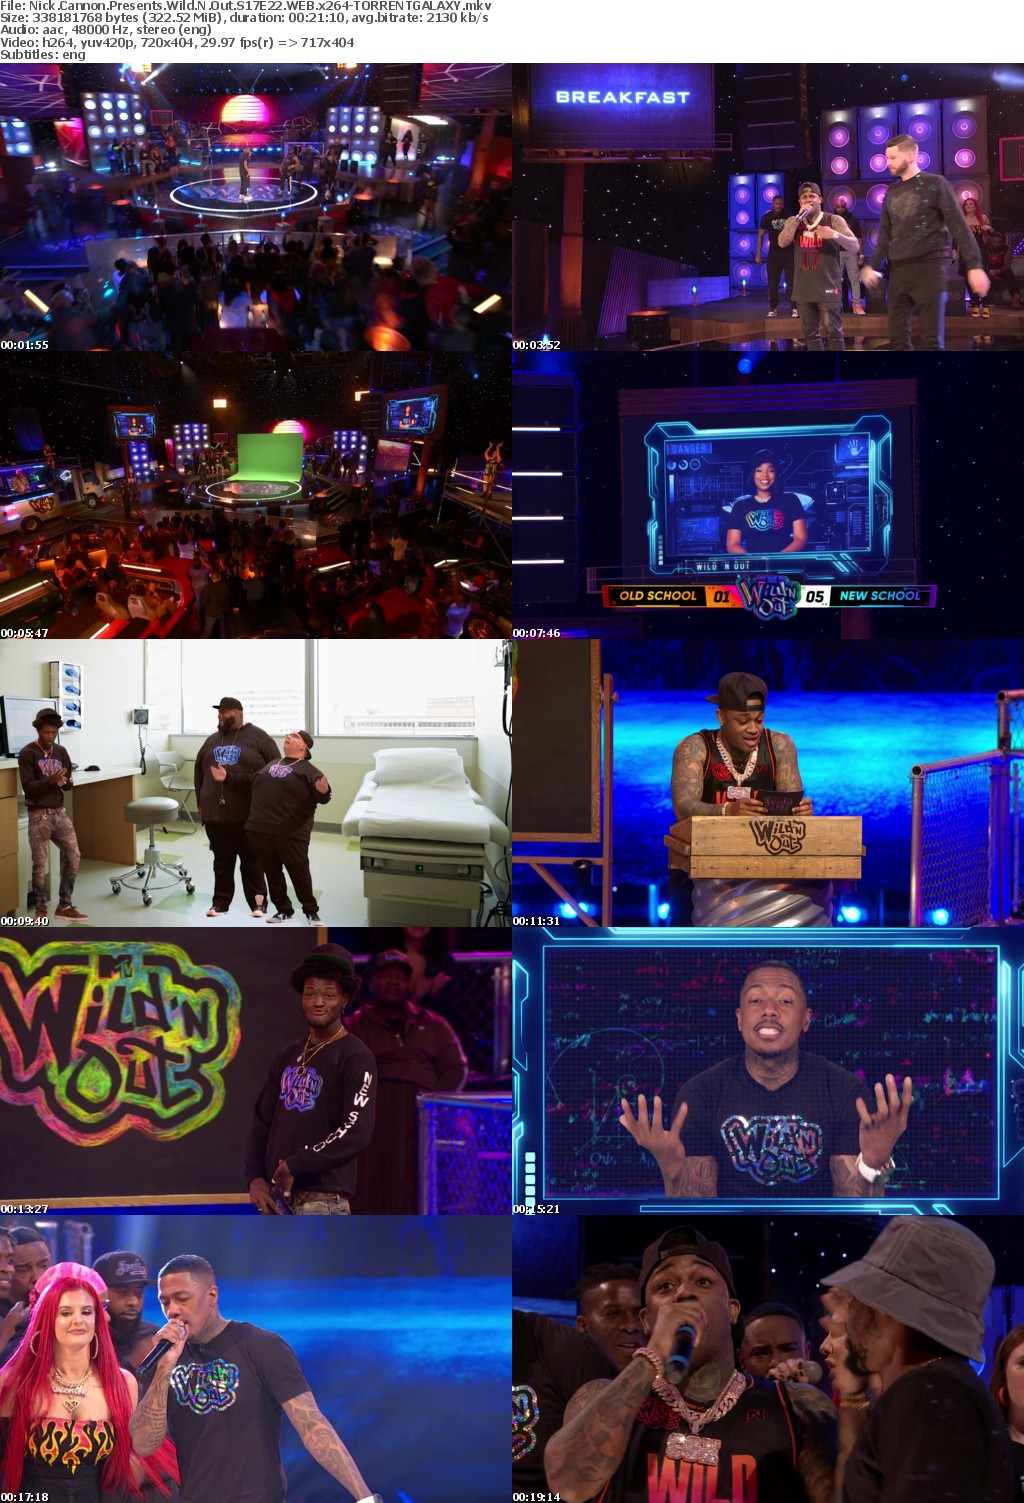 Nick Cannon Presents Wild N Out S17E22 WEB x264-GALAXY